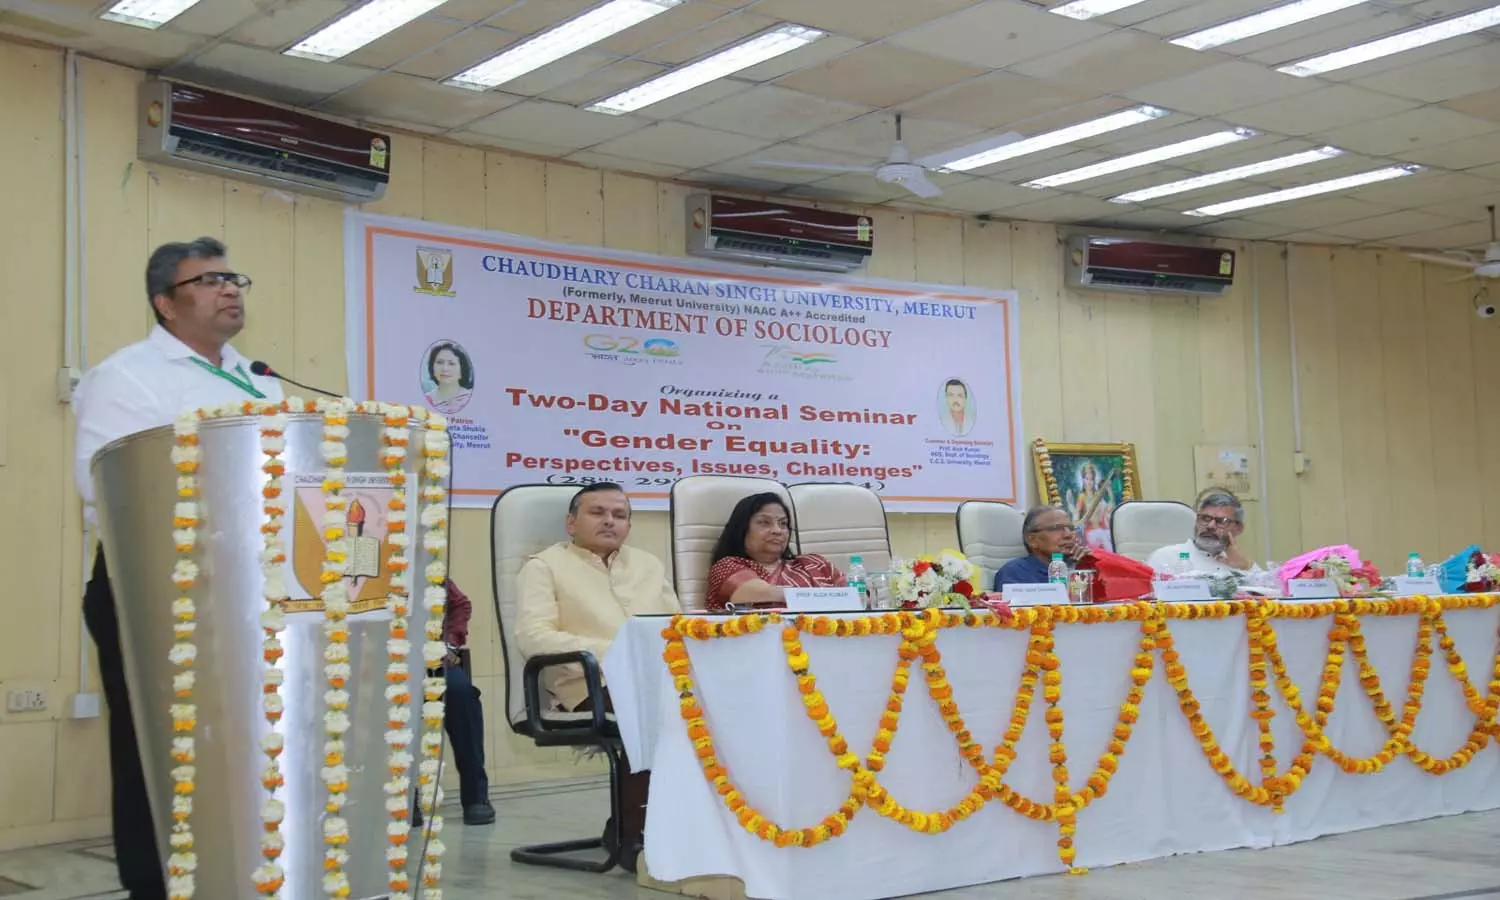 A two-day workshop on Indian Knowledge Tradition Teacher Training was organized at Chaudhary Charan Singh University